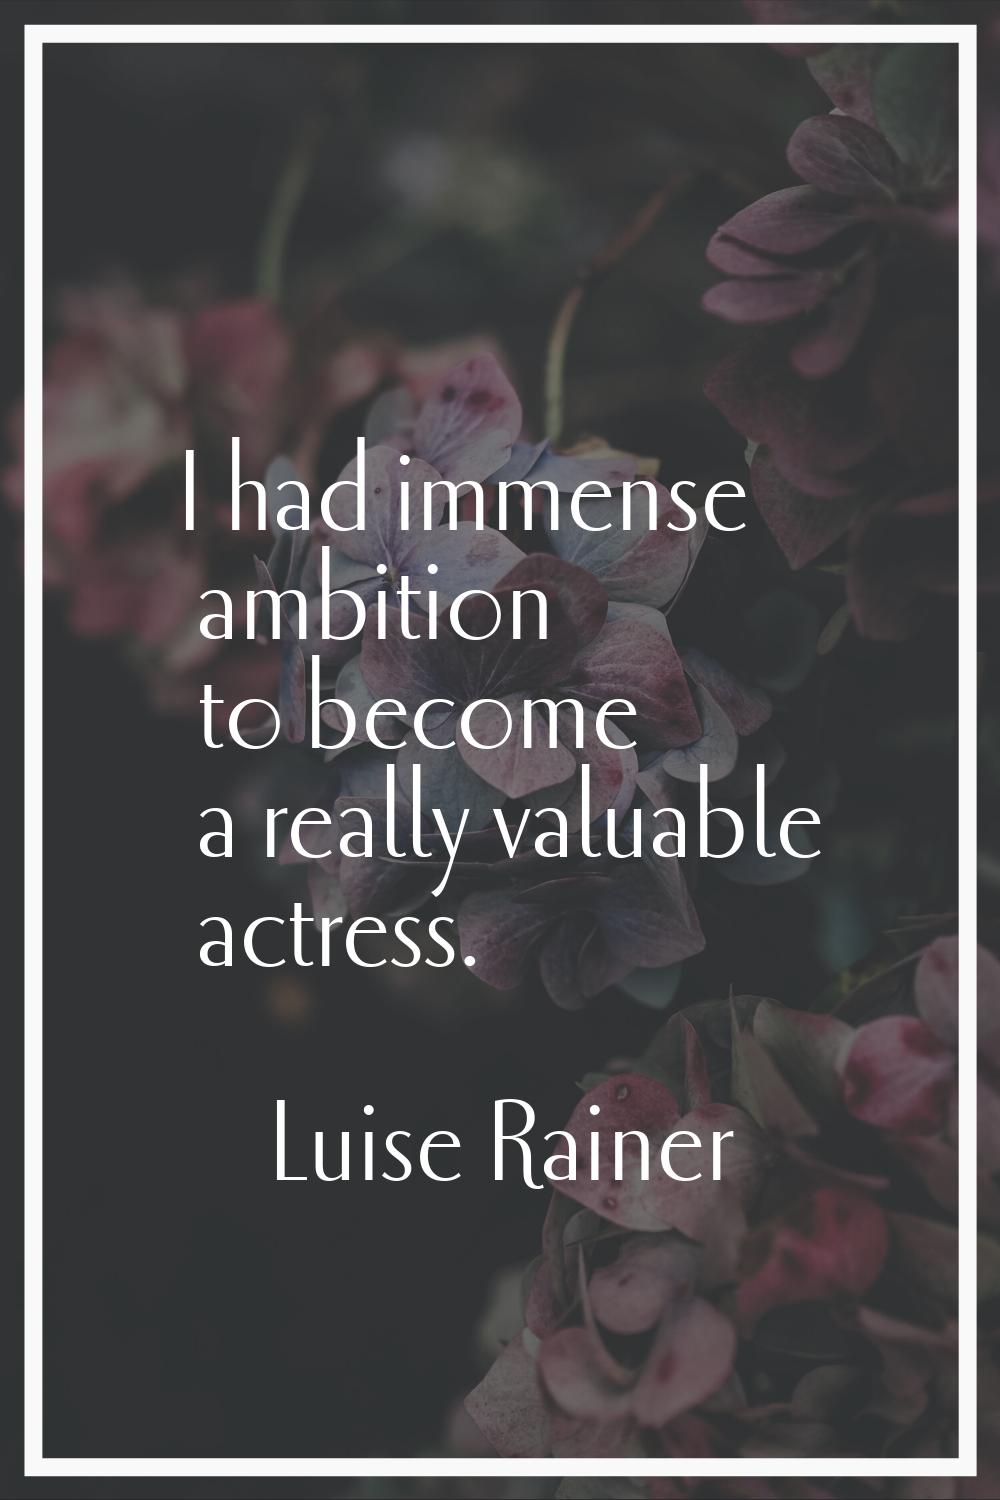 I had immense ambition to become a really valuable actress.